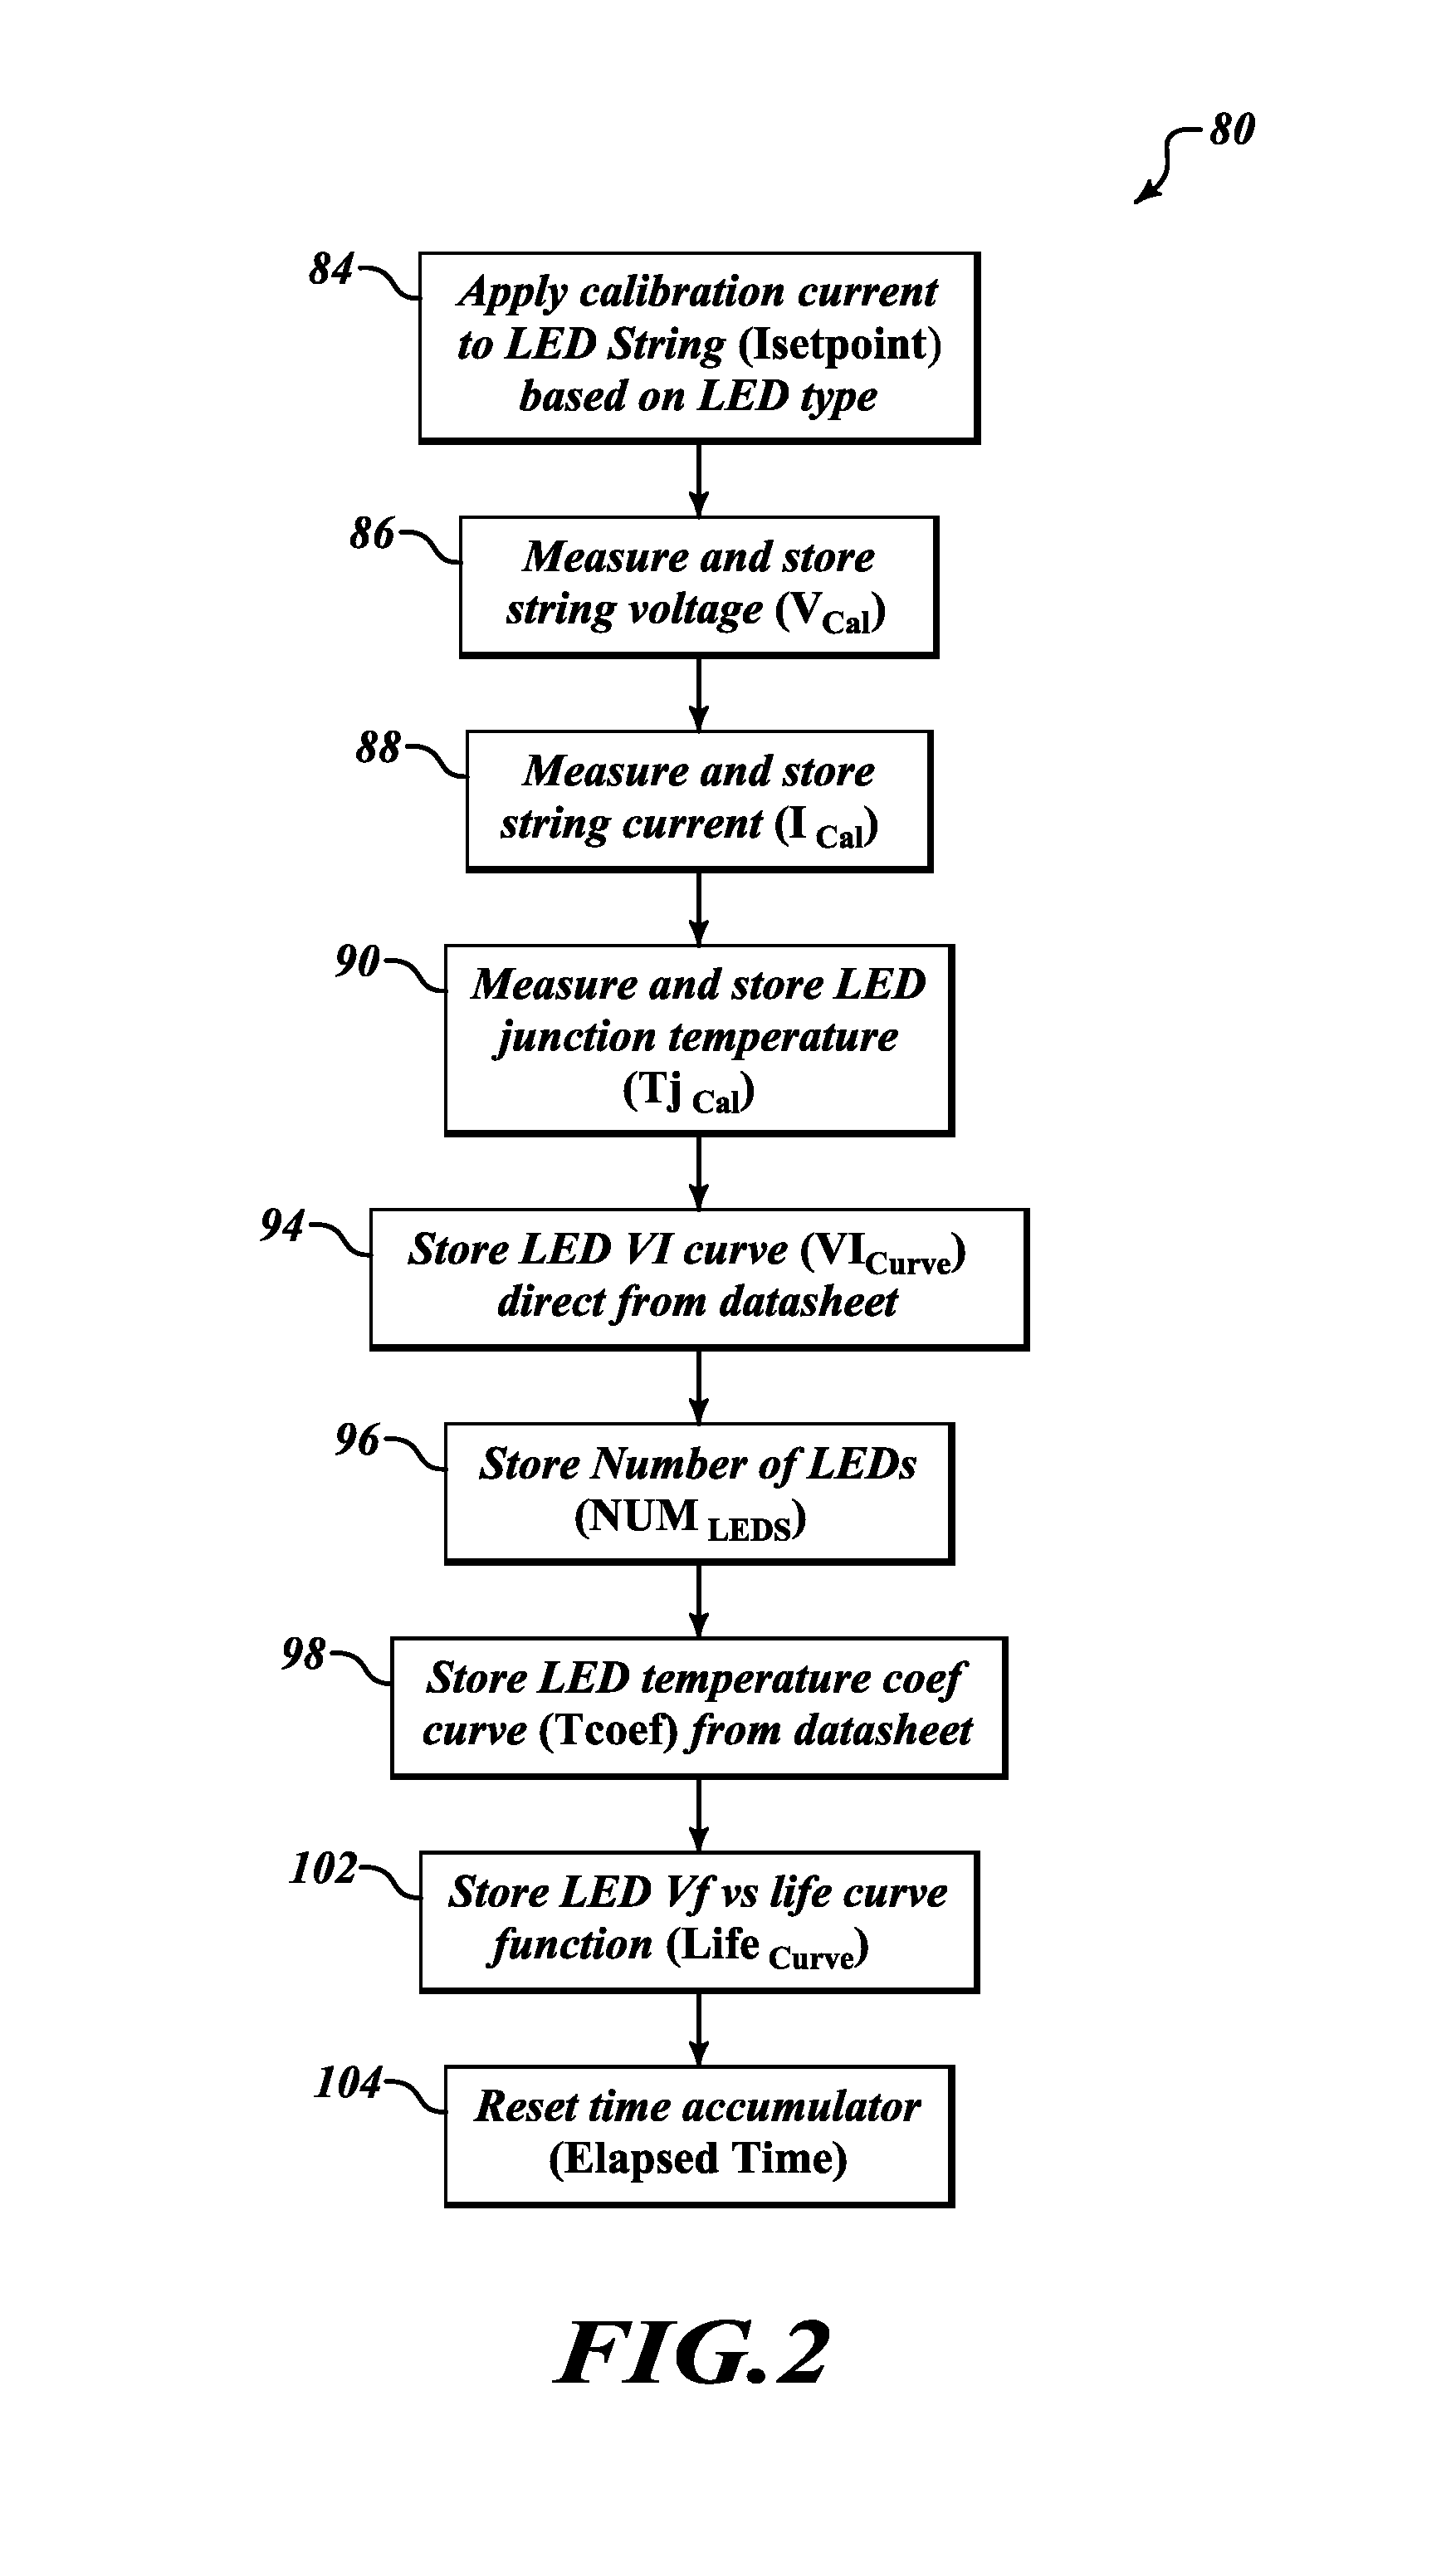 Systems and methods for monitoring operation of an LED string